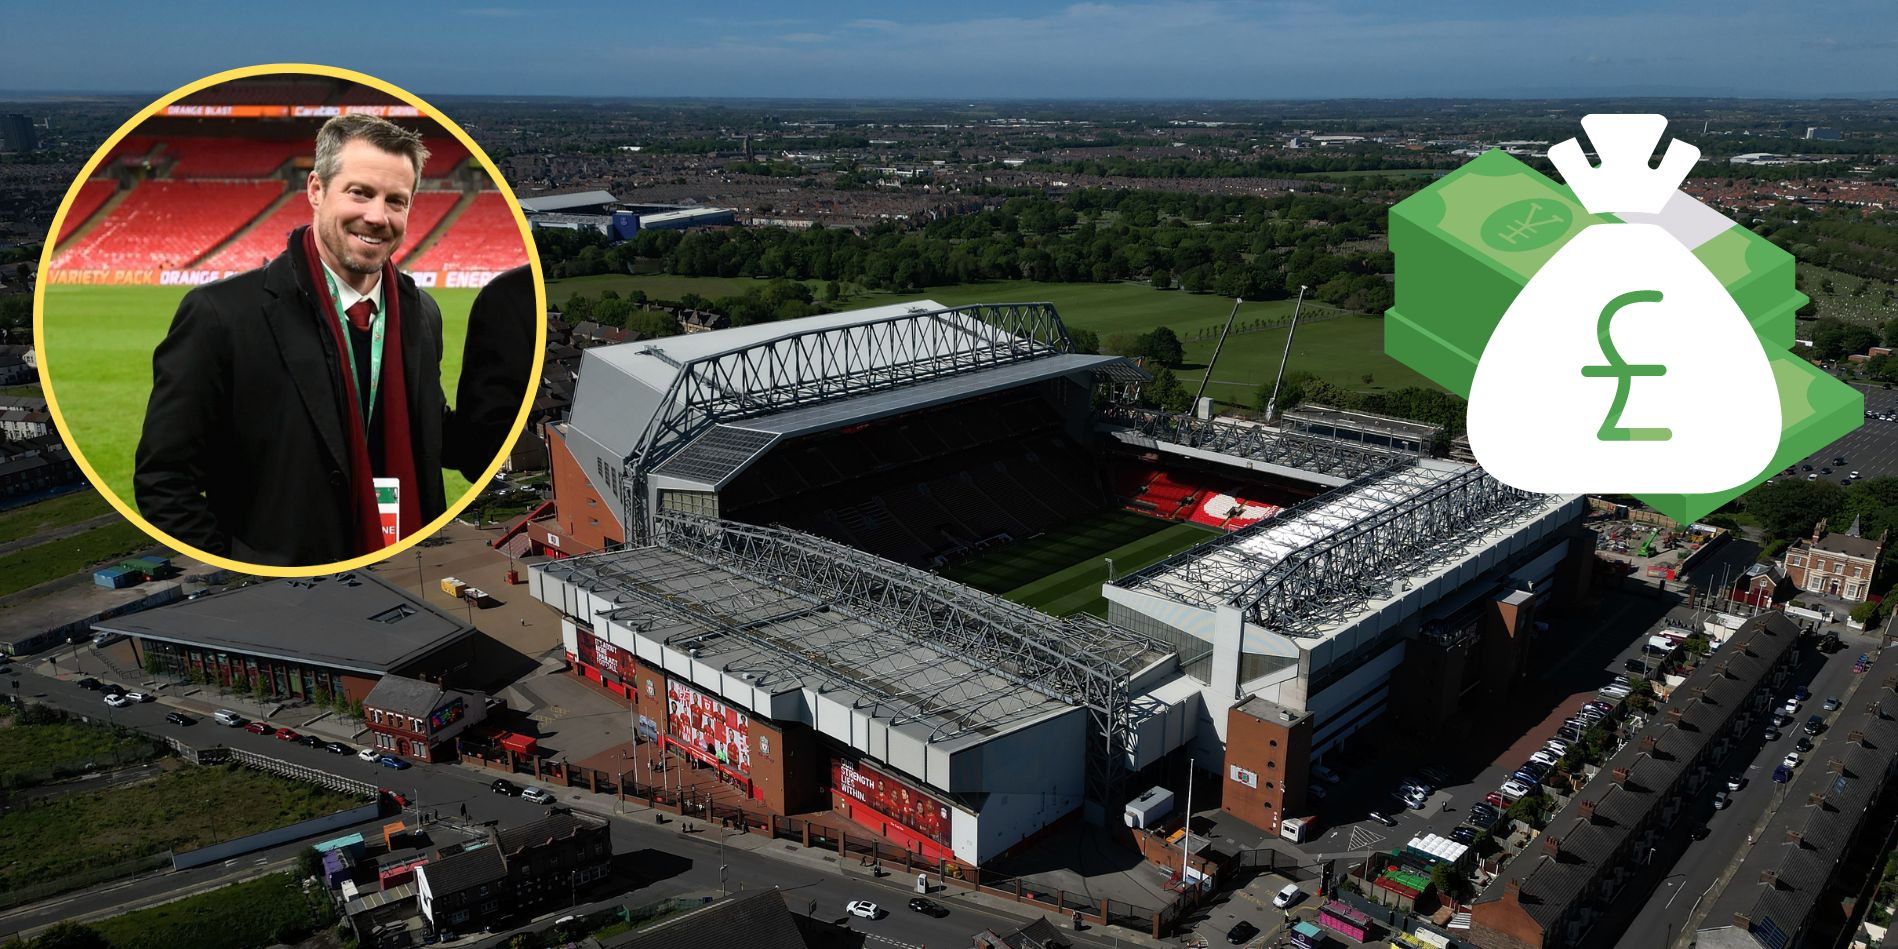 Liverpool could be set for surprise finance boost as club considers maximising stadium revenue